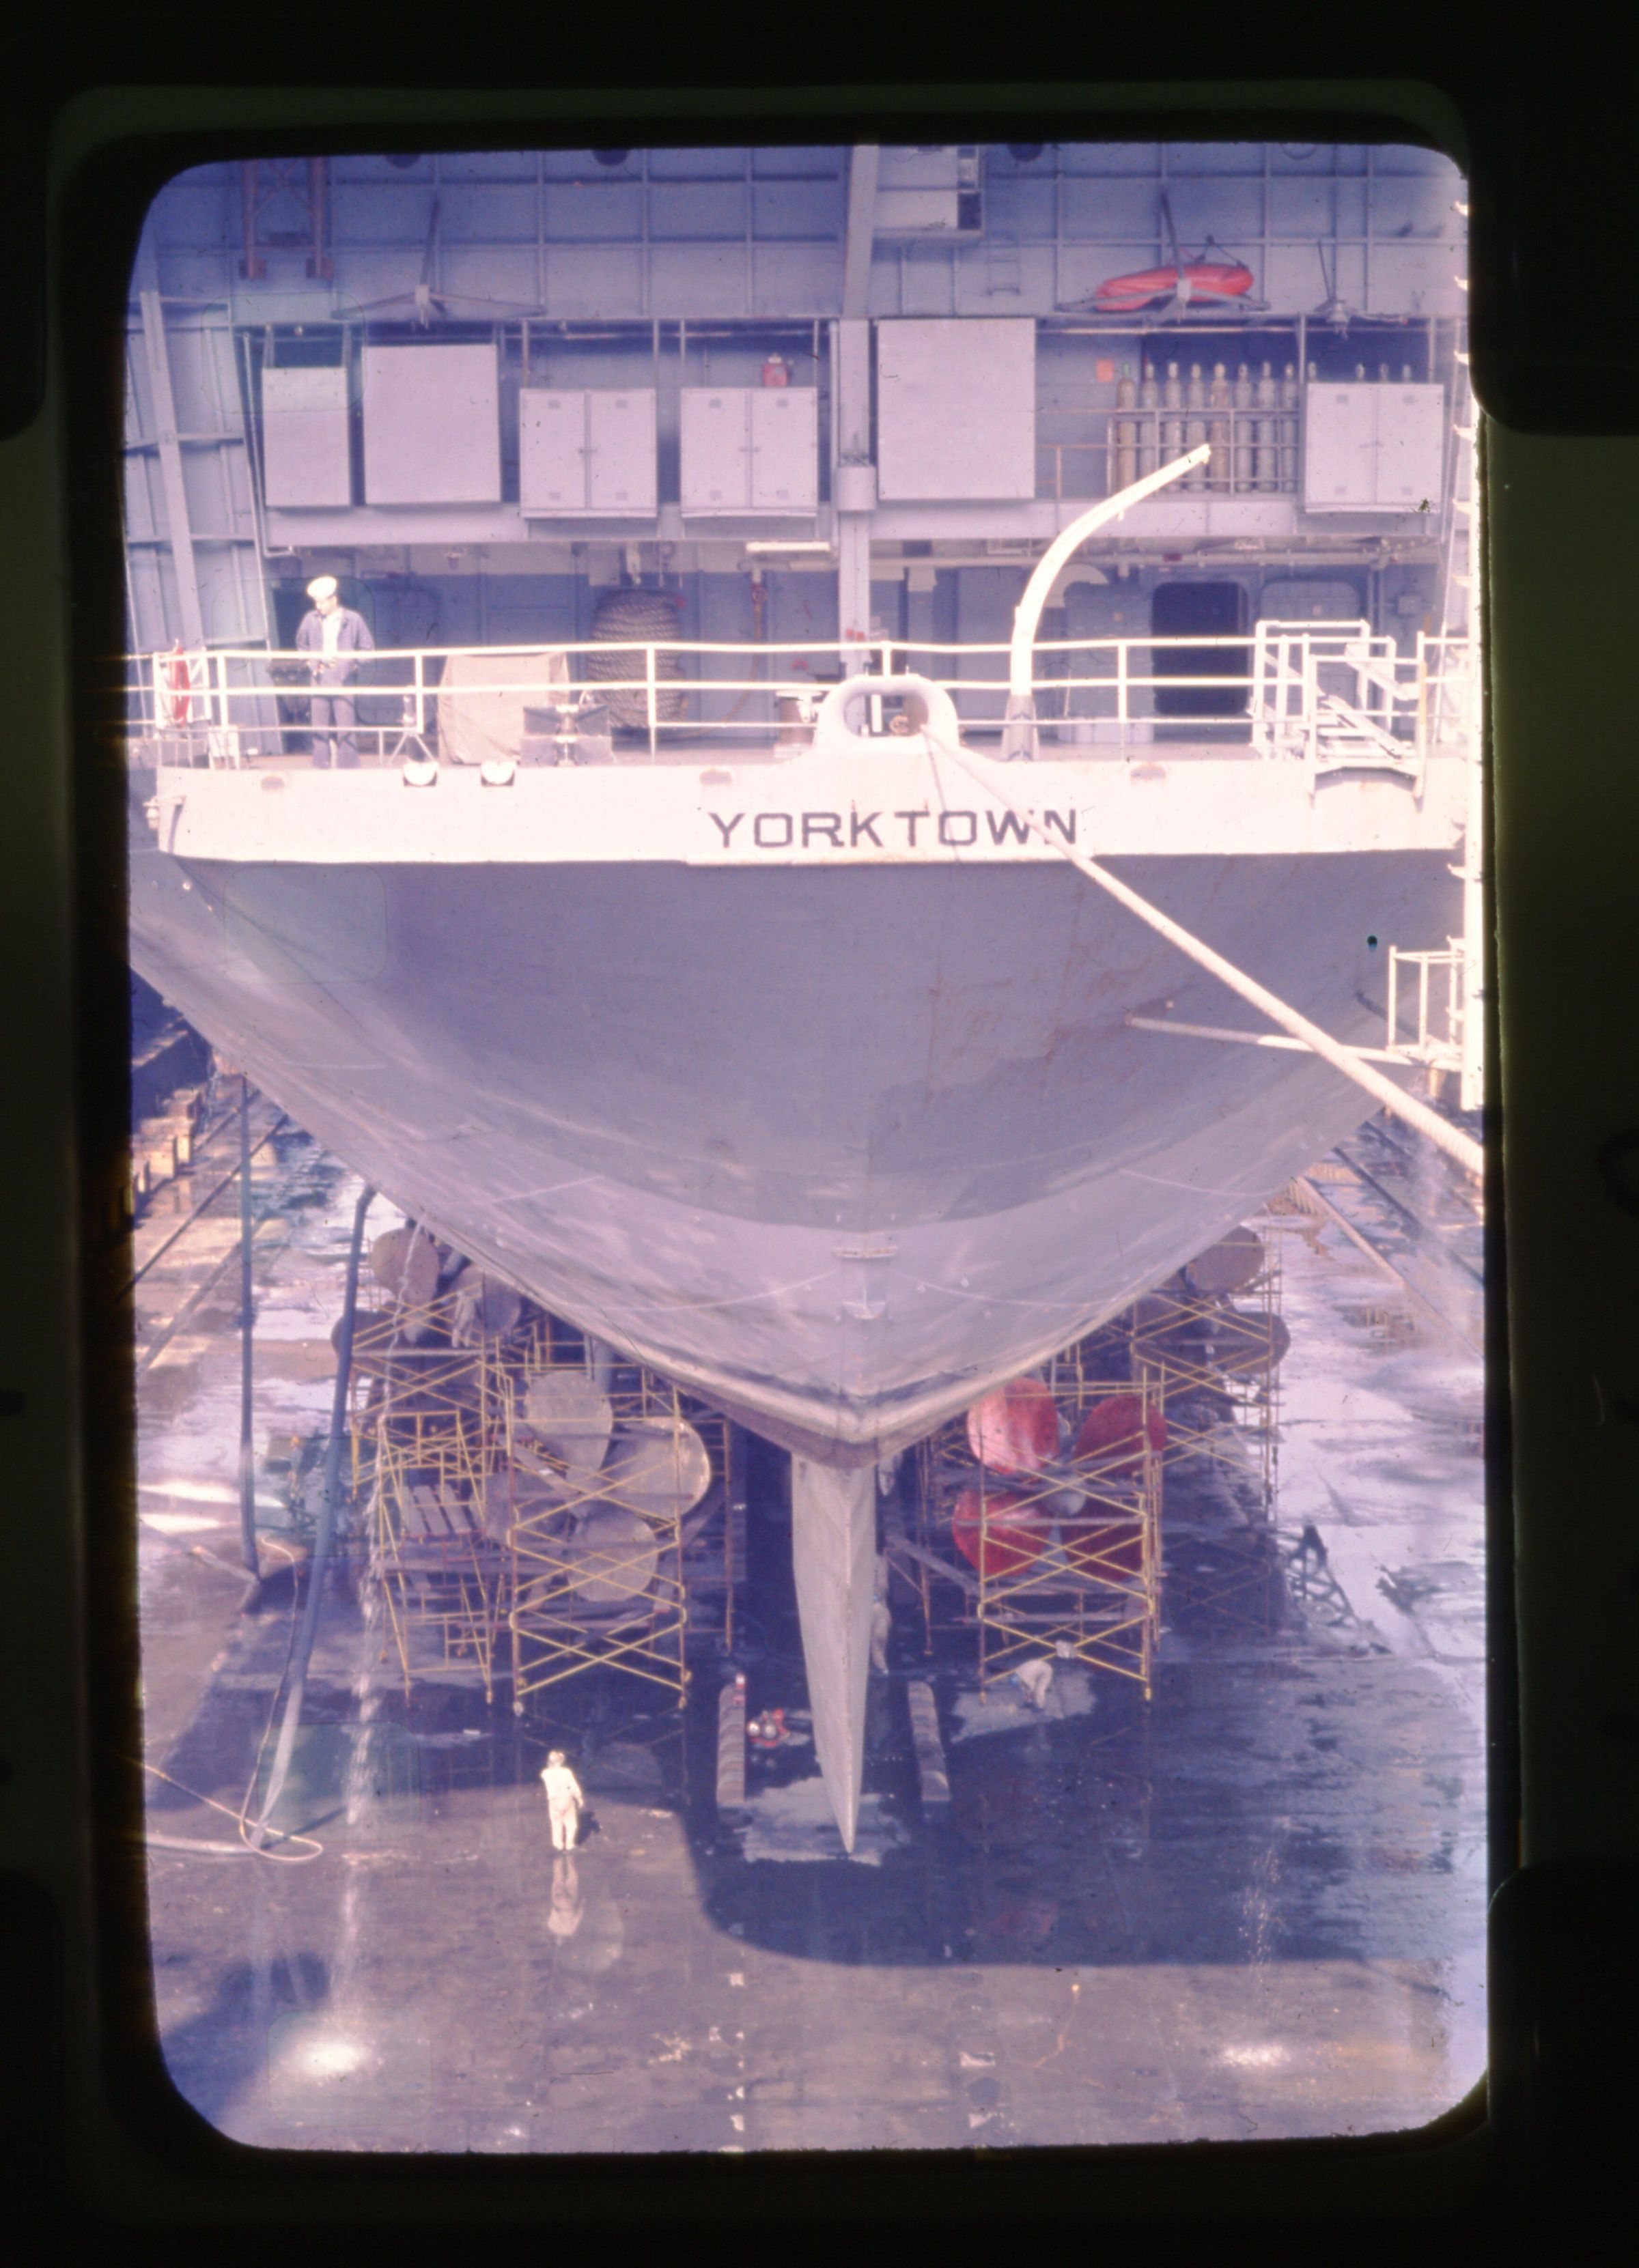 Primary Image of The USS Yorktown's (CVS-10) Fantail While in Drydock